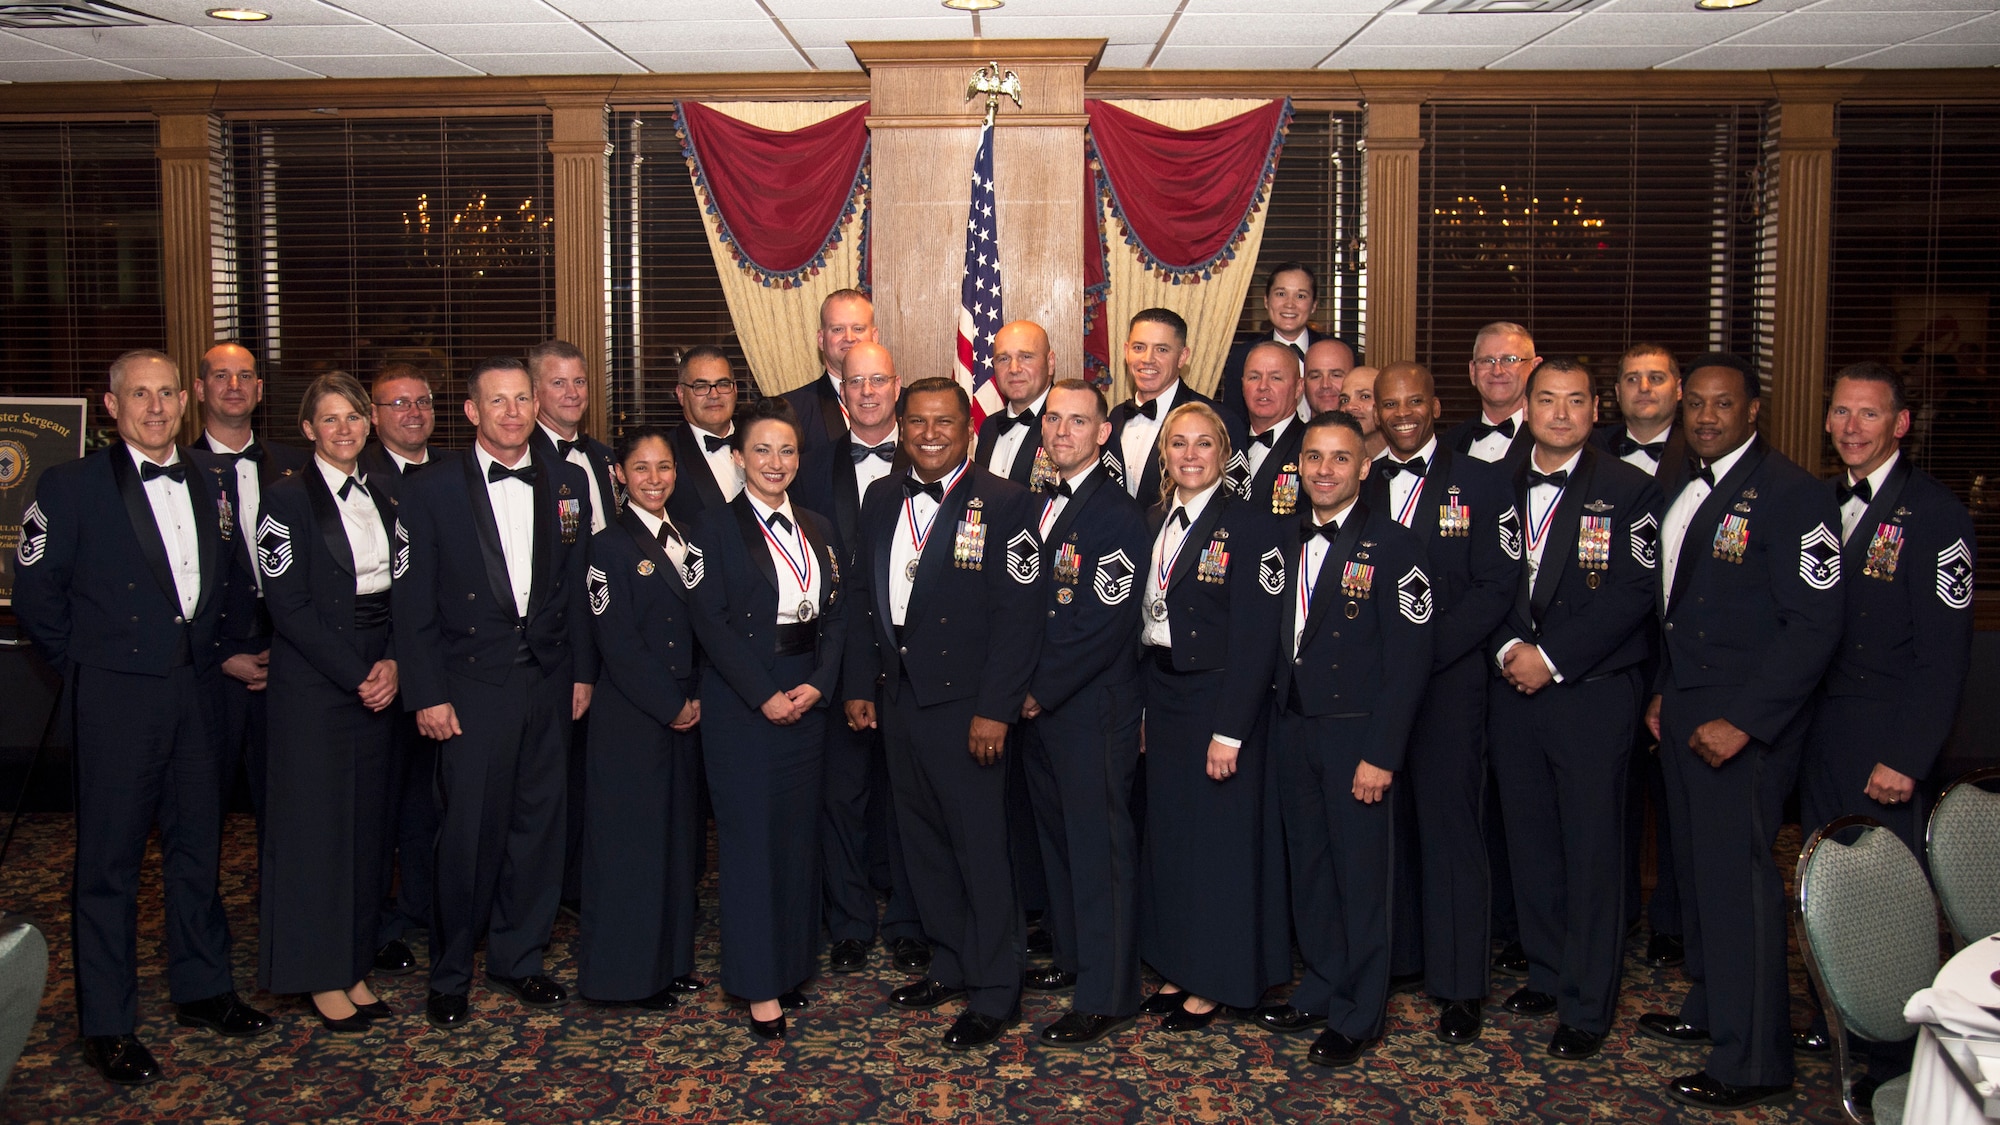 U.S. Air Force chief master sergeant selects and current Chiefs pose for a photo during a Chief’s Induction Ceremony, Jan. 31, in Tampa, Fla. Only 1% of enlisted Airmen reach the rank of chief master sergeant.